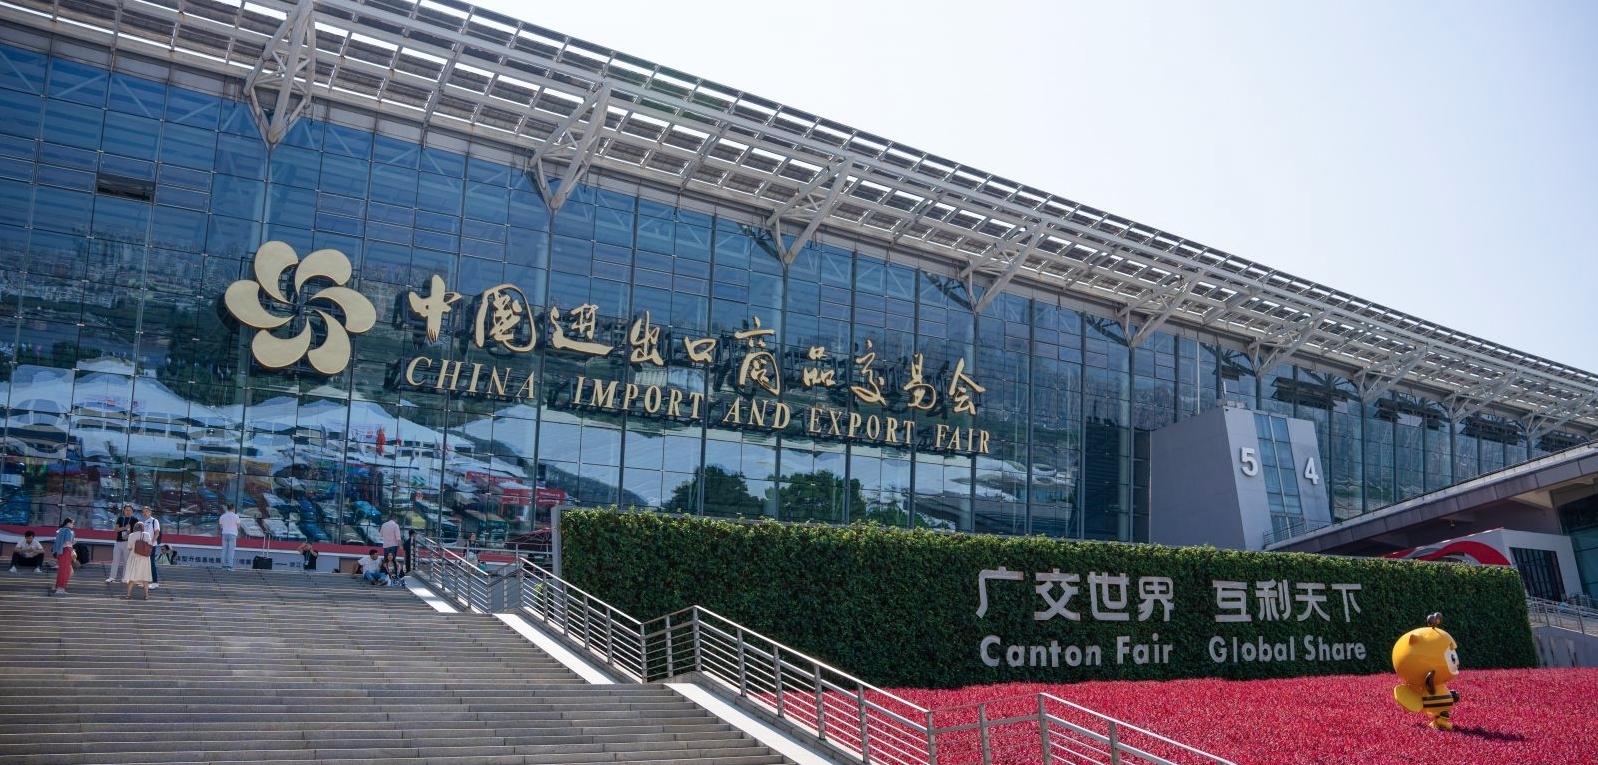 The 135th Canton Fair, we are coming